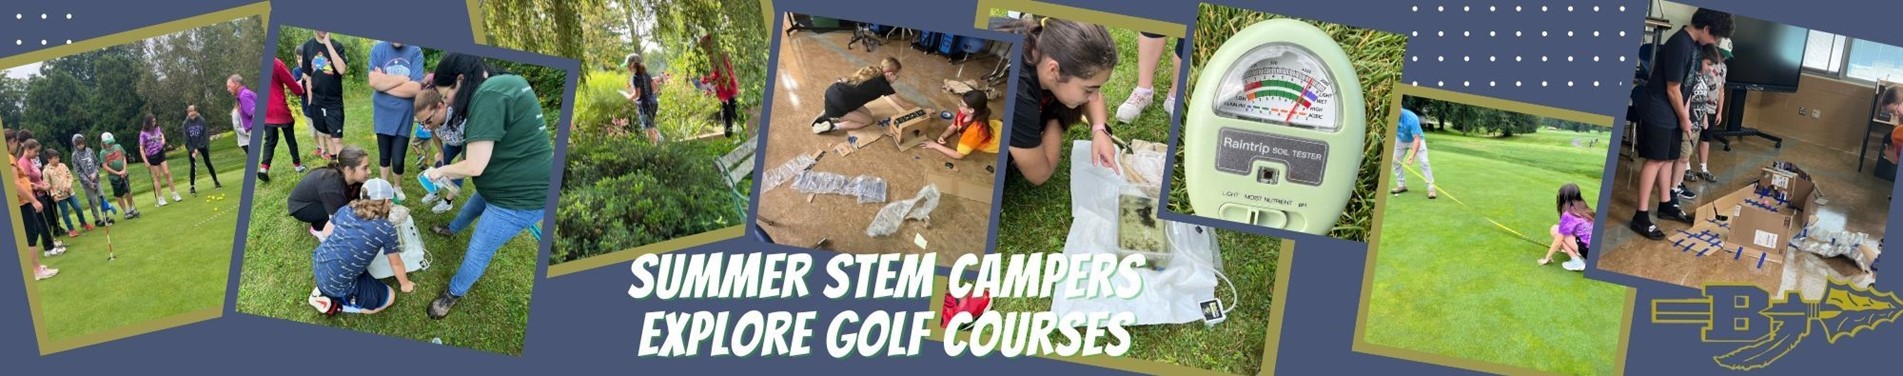 BMS Summer Campers explore golf courses